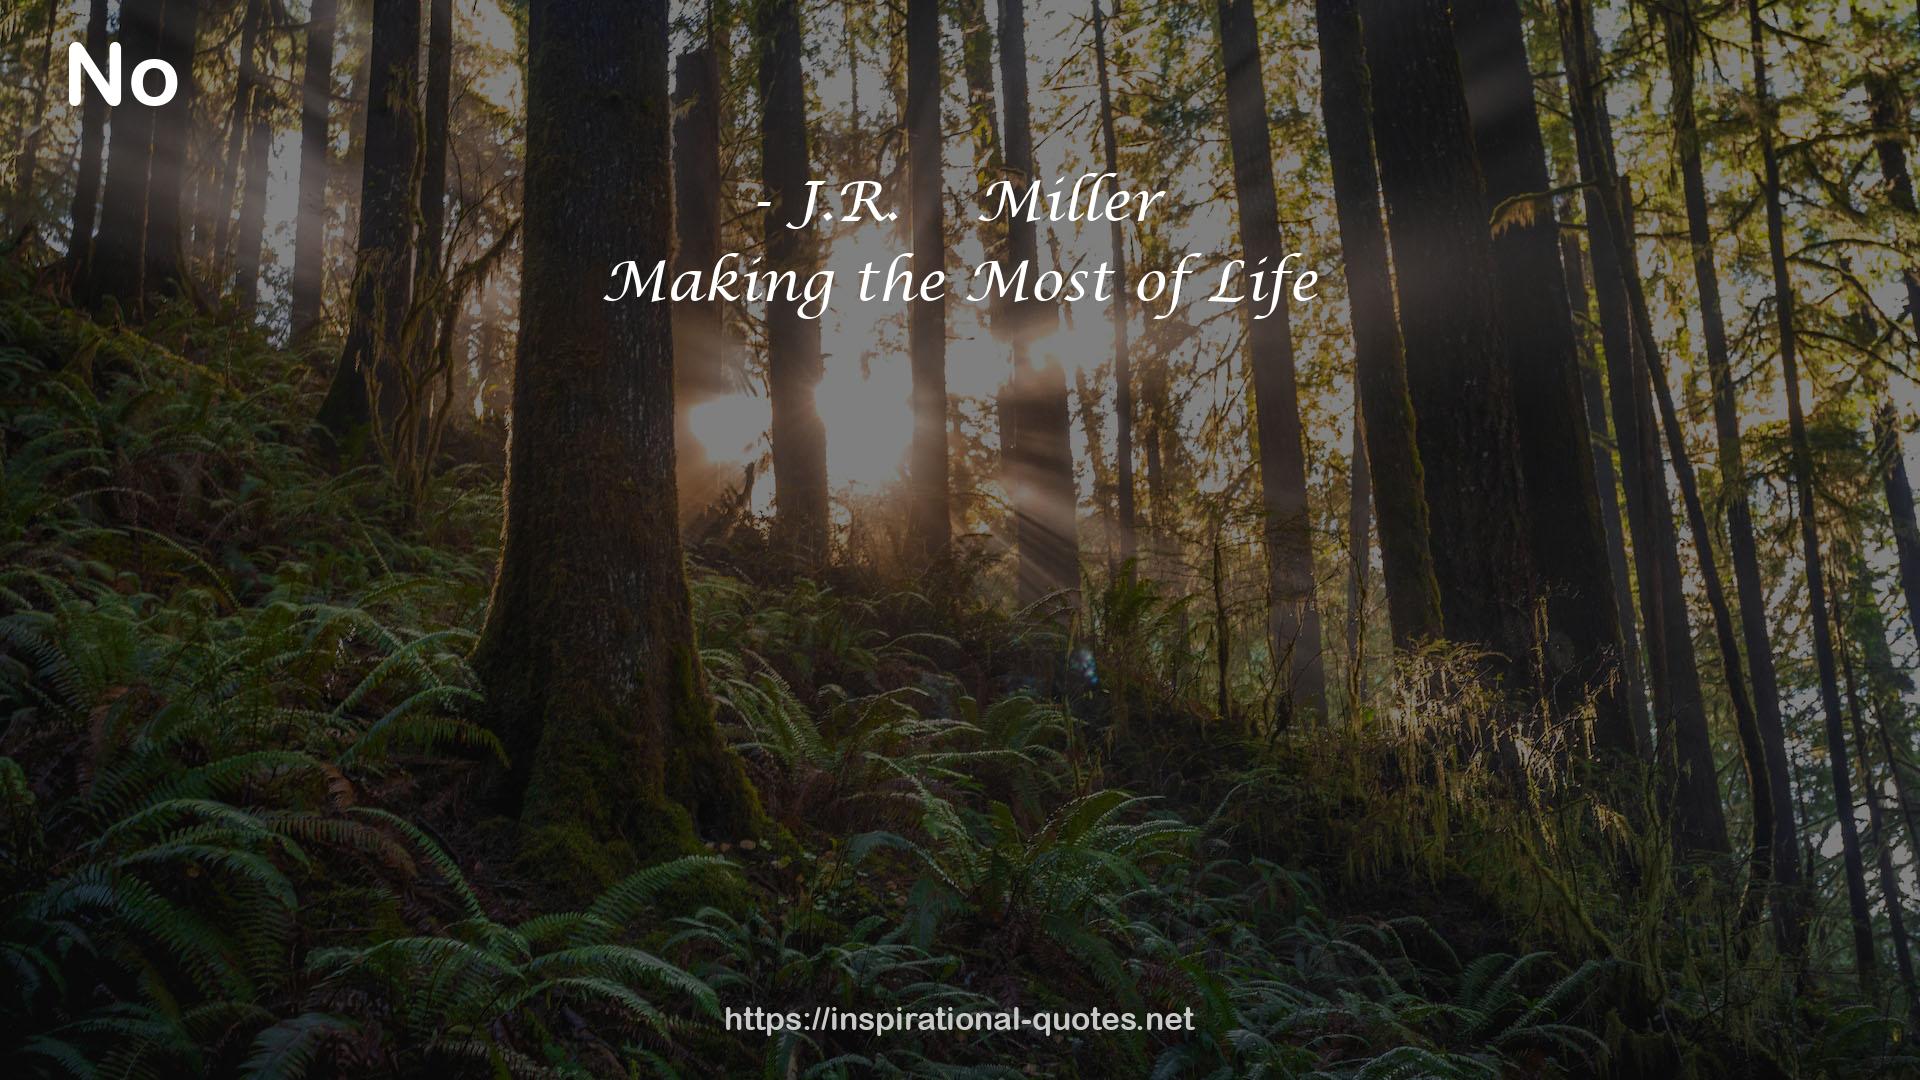 Making the Most of Life QUOTES